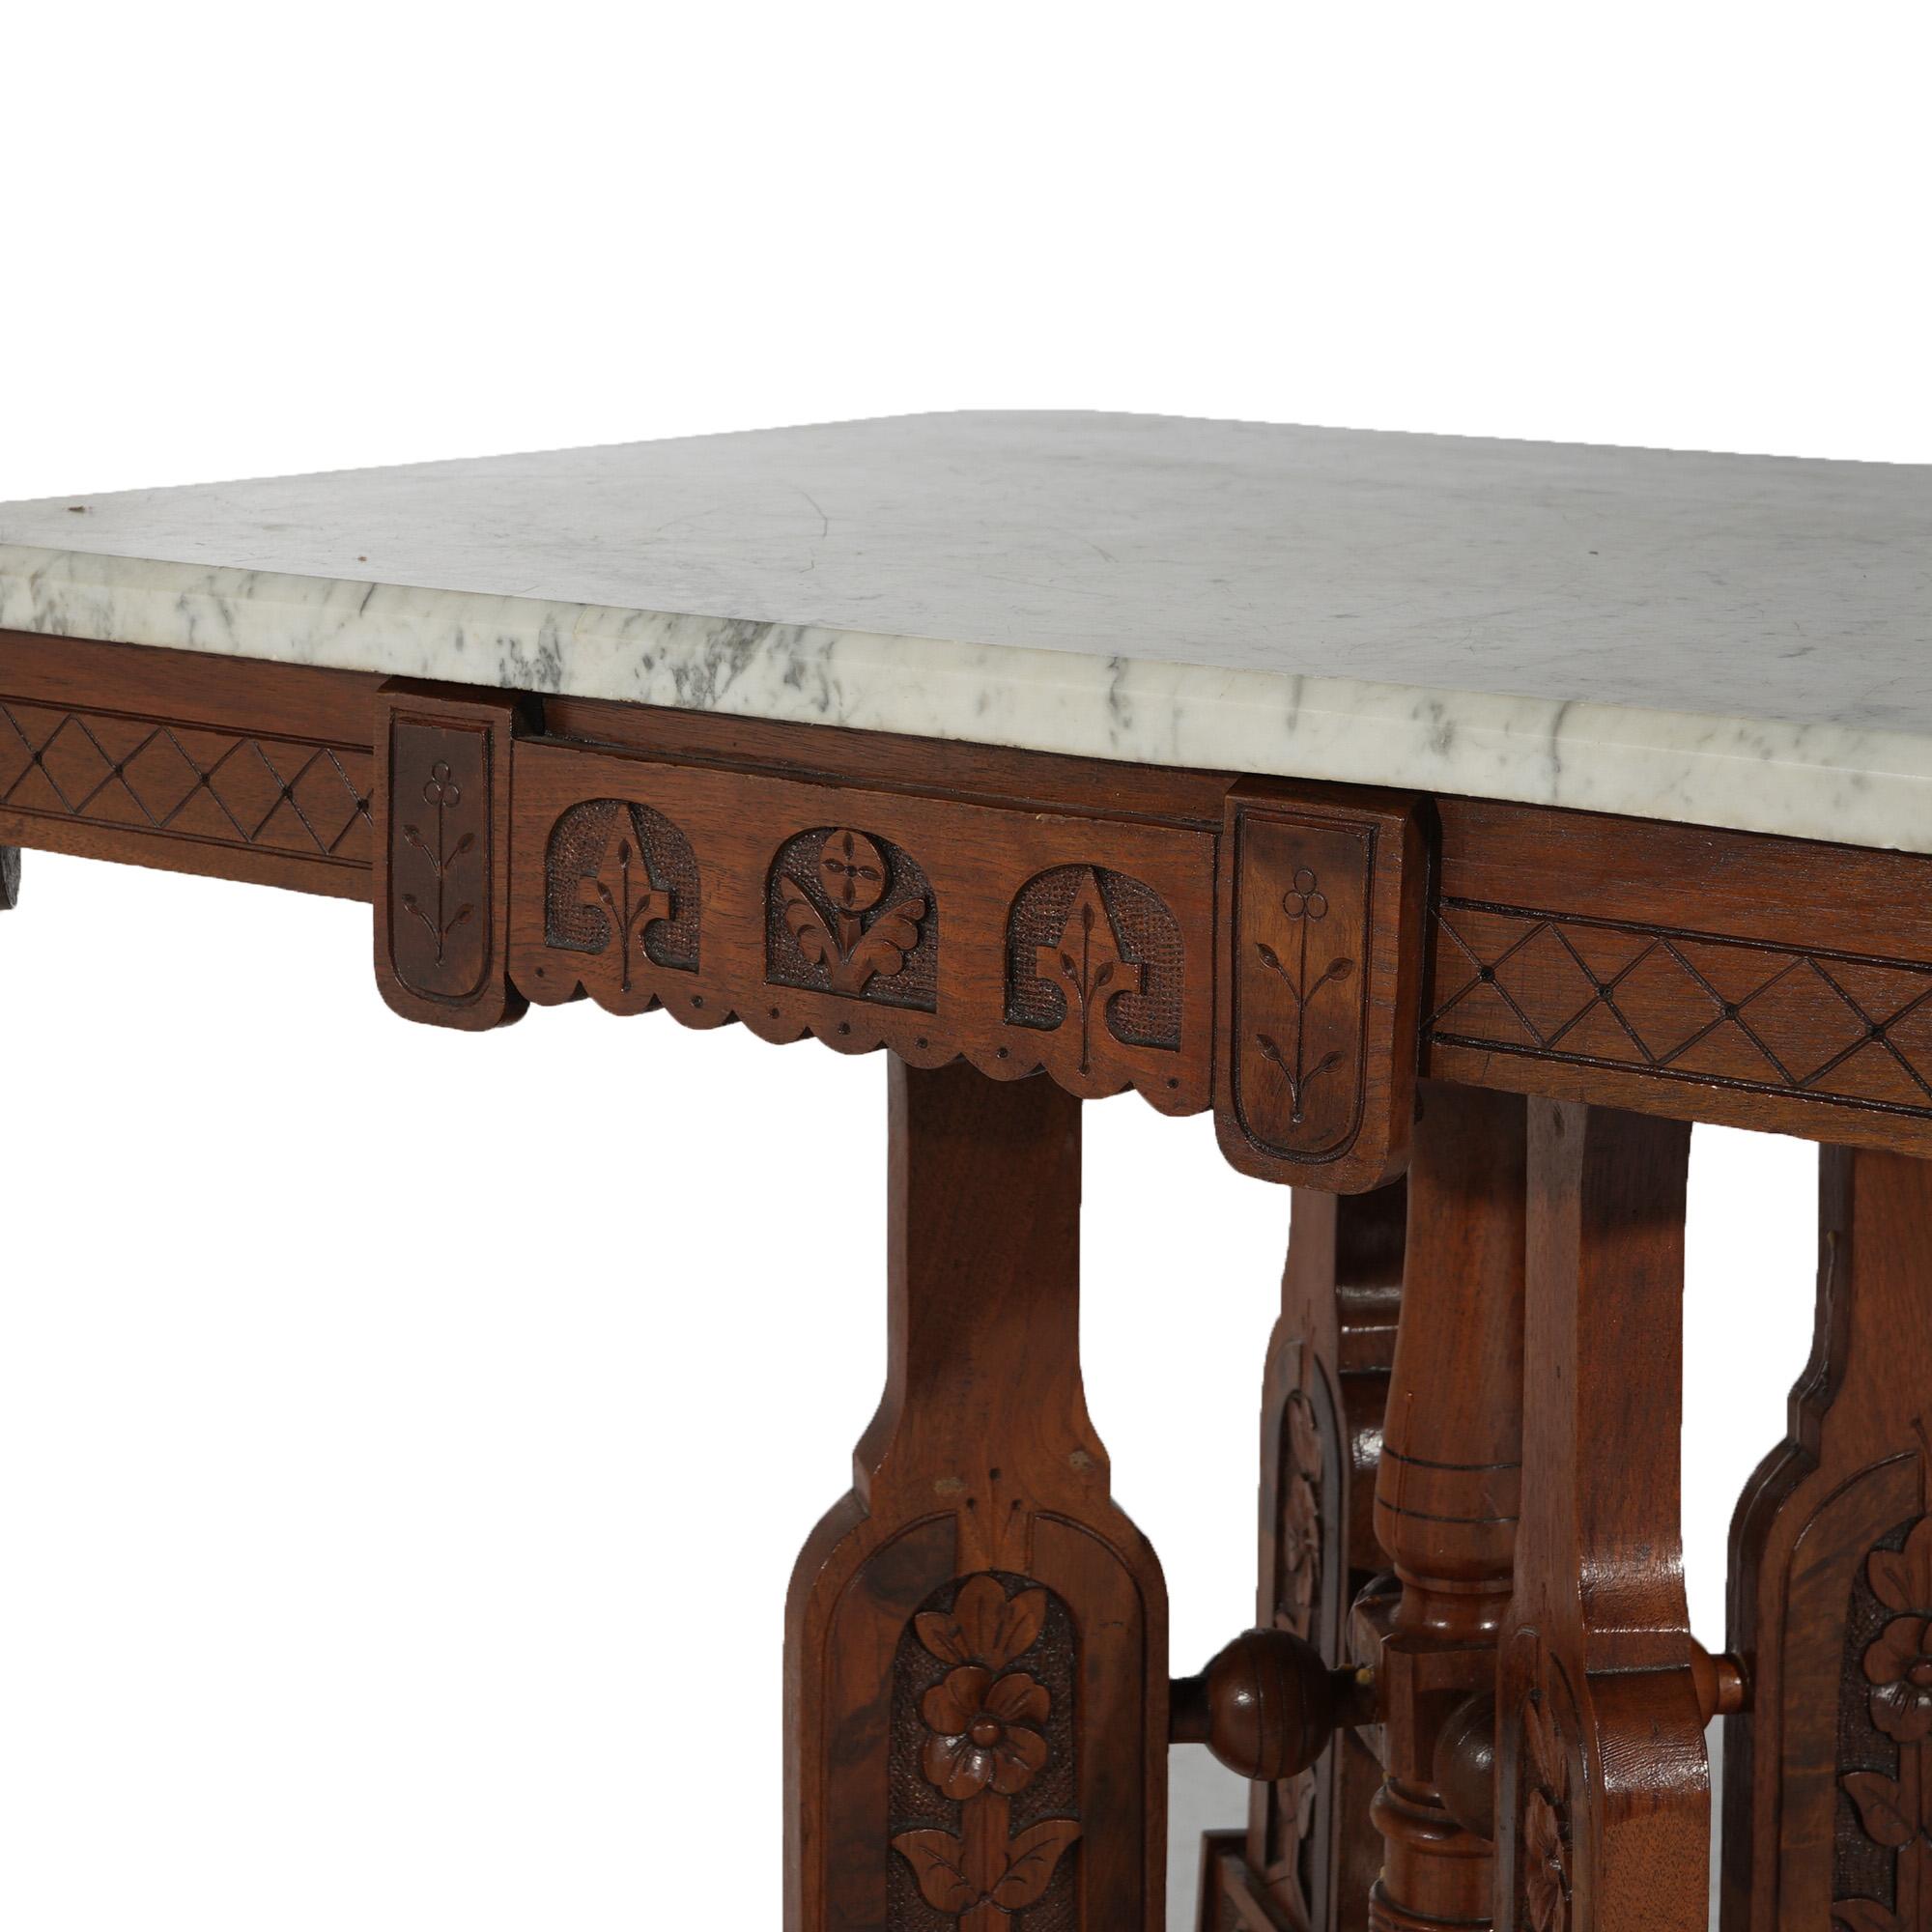 Antique Eastlake Aesthetic Floral Carved Walnut & Marble Parlor Table, c1880 For Sale 1